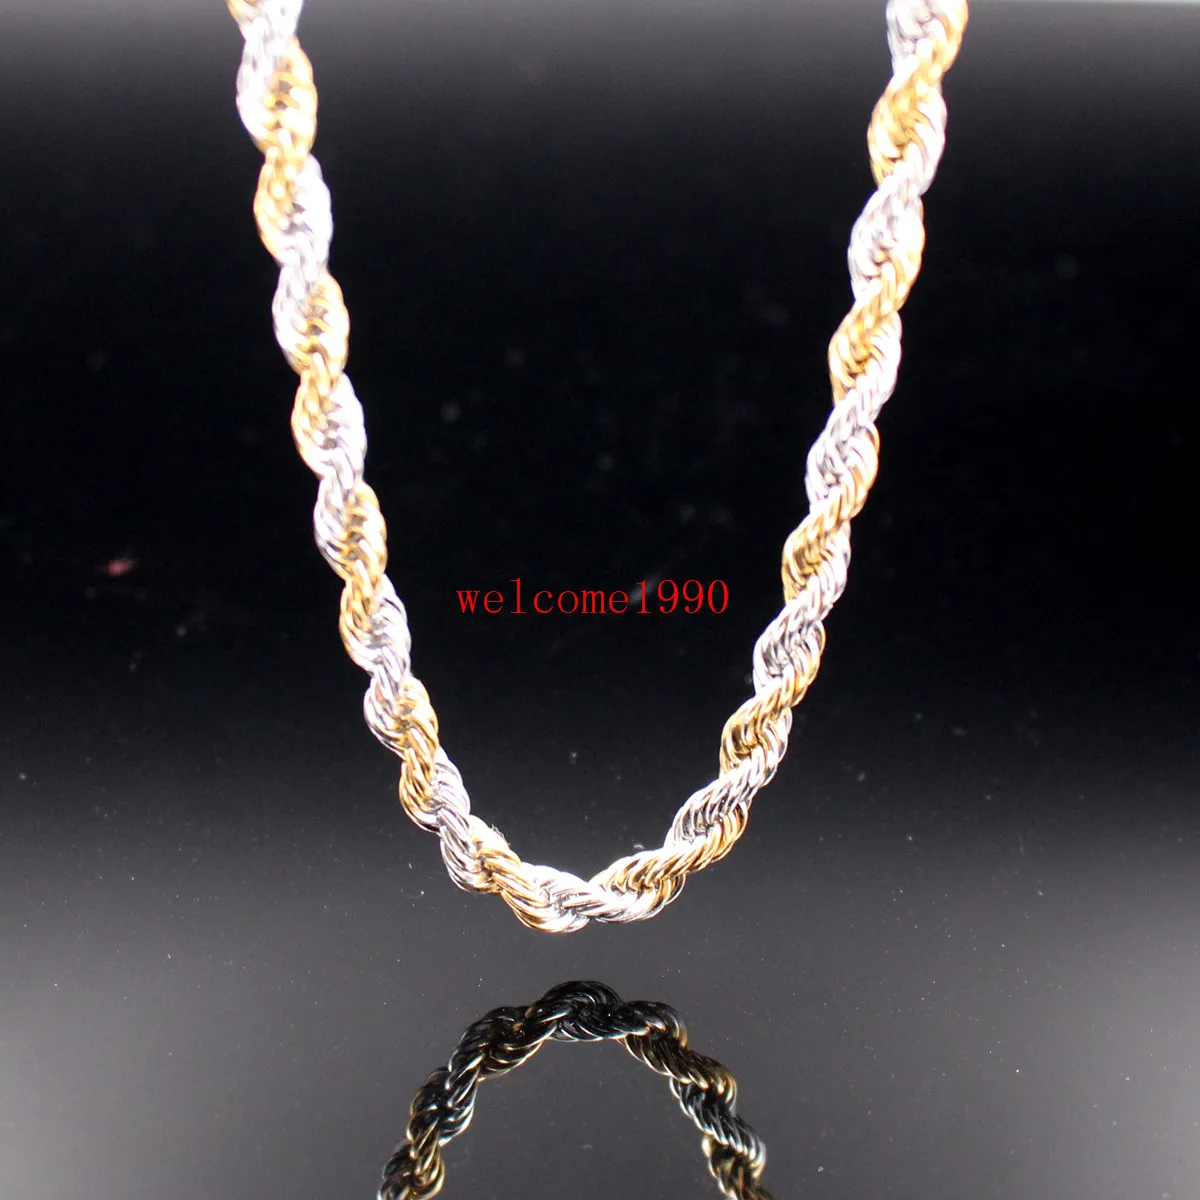 24 inch 5mm 6mm Gold Silver Stainless Steel ed singapore chain Rope Chain Link Necklaces Women Men Brand New250O